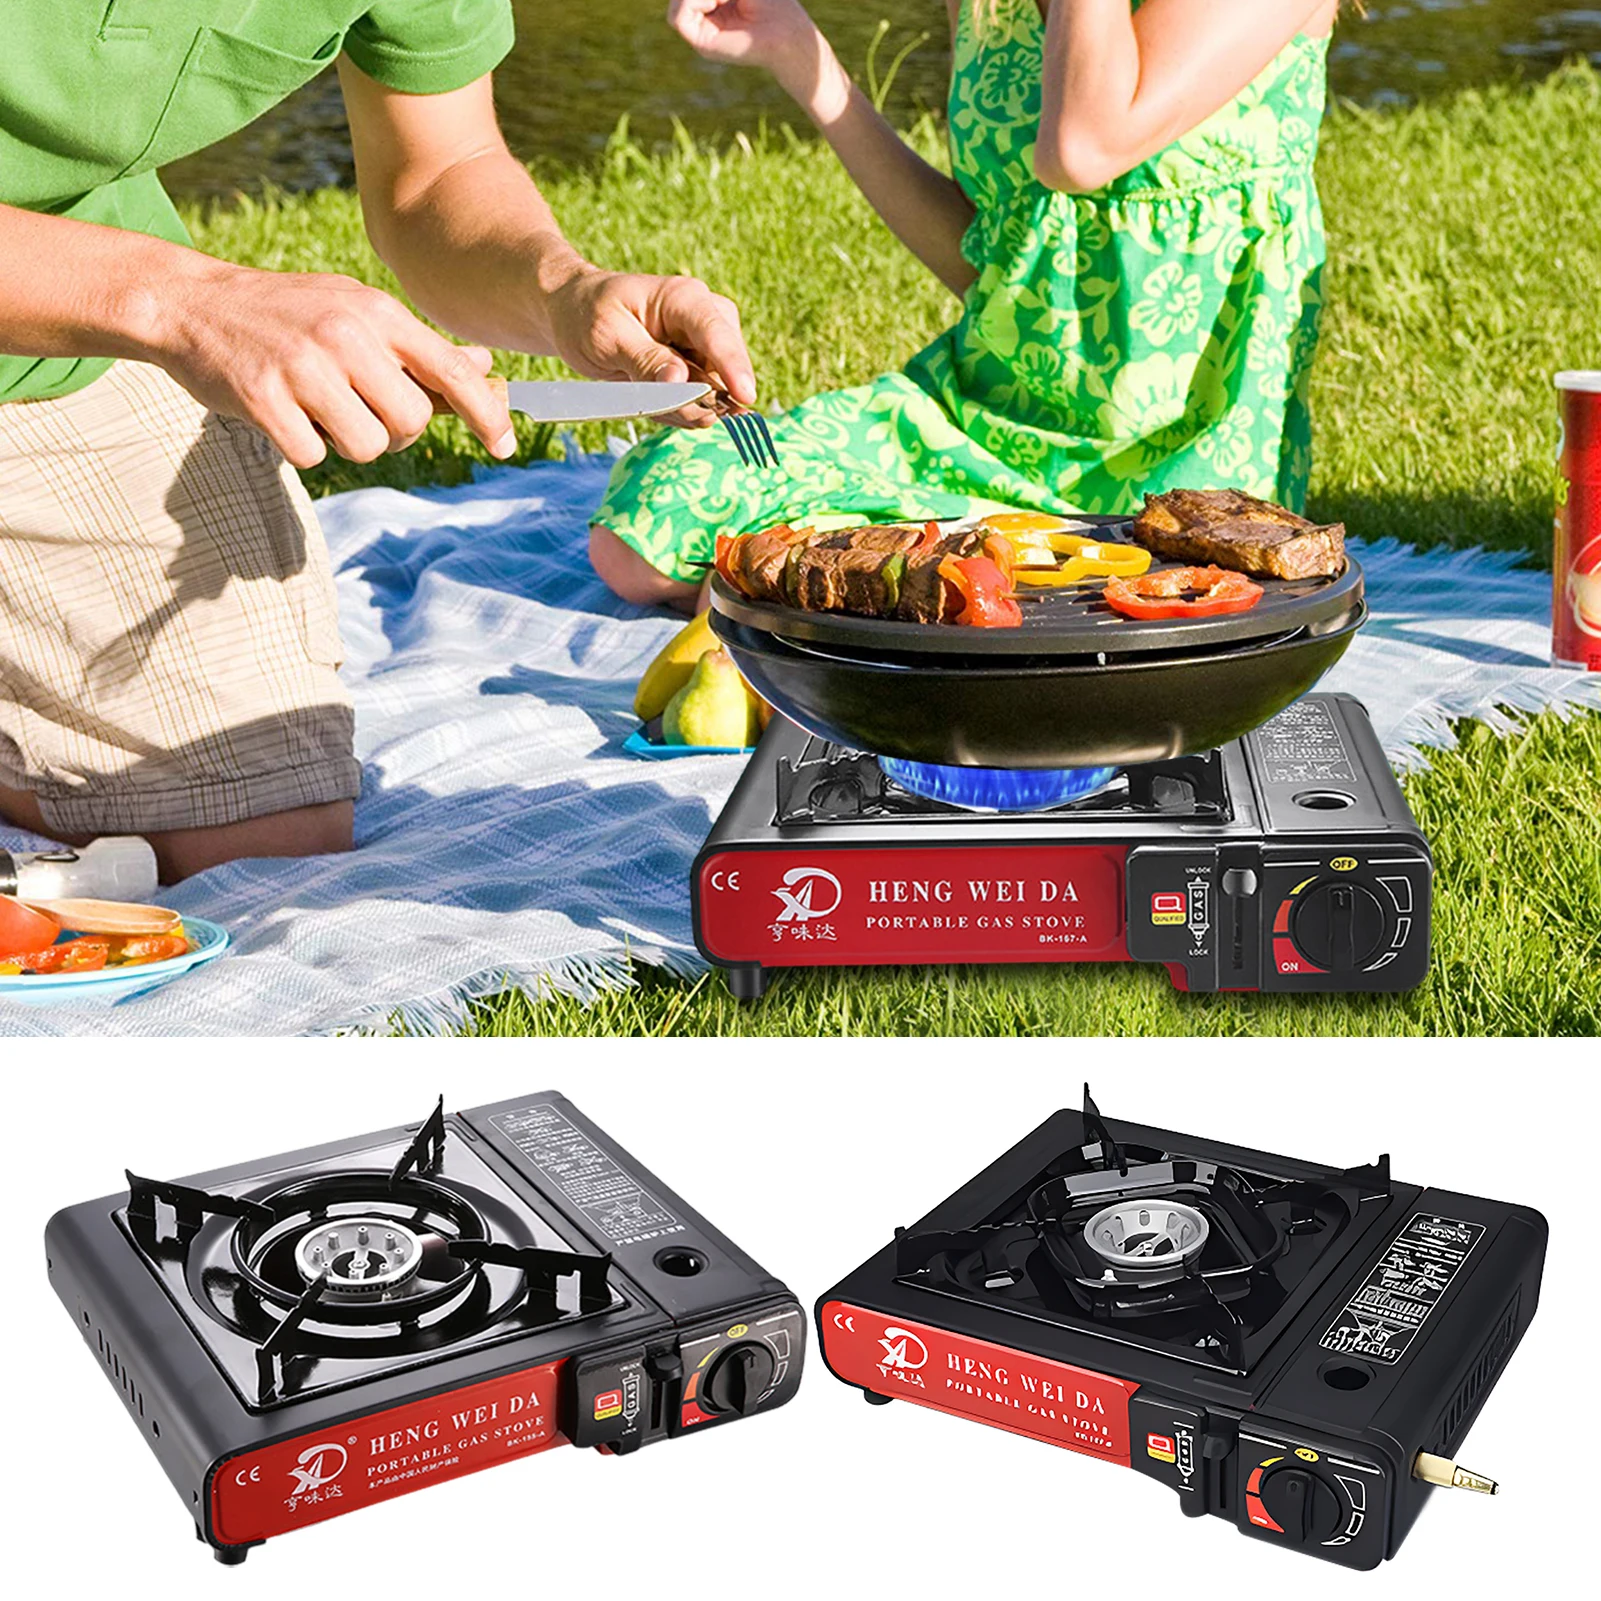 

Portable Camping Stove Double Single Burner With 3 Layers Flame Cassette Furnace Single Double Burners Camping Cooking Gear For